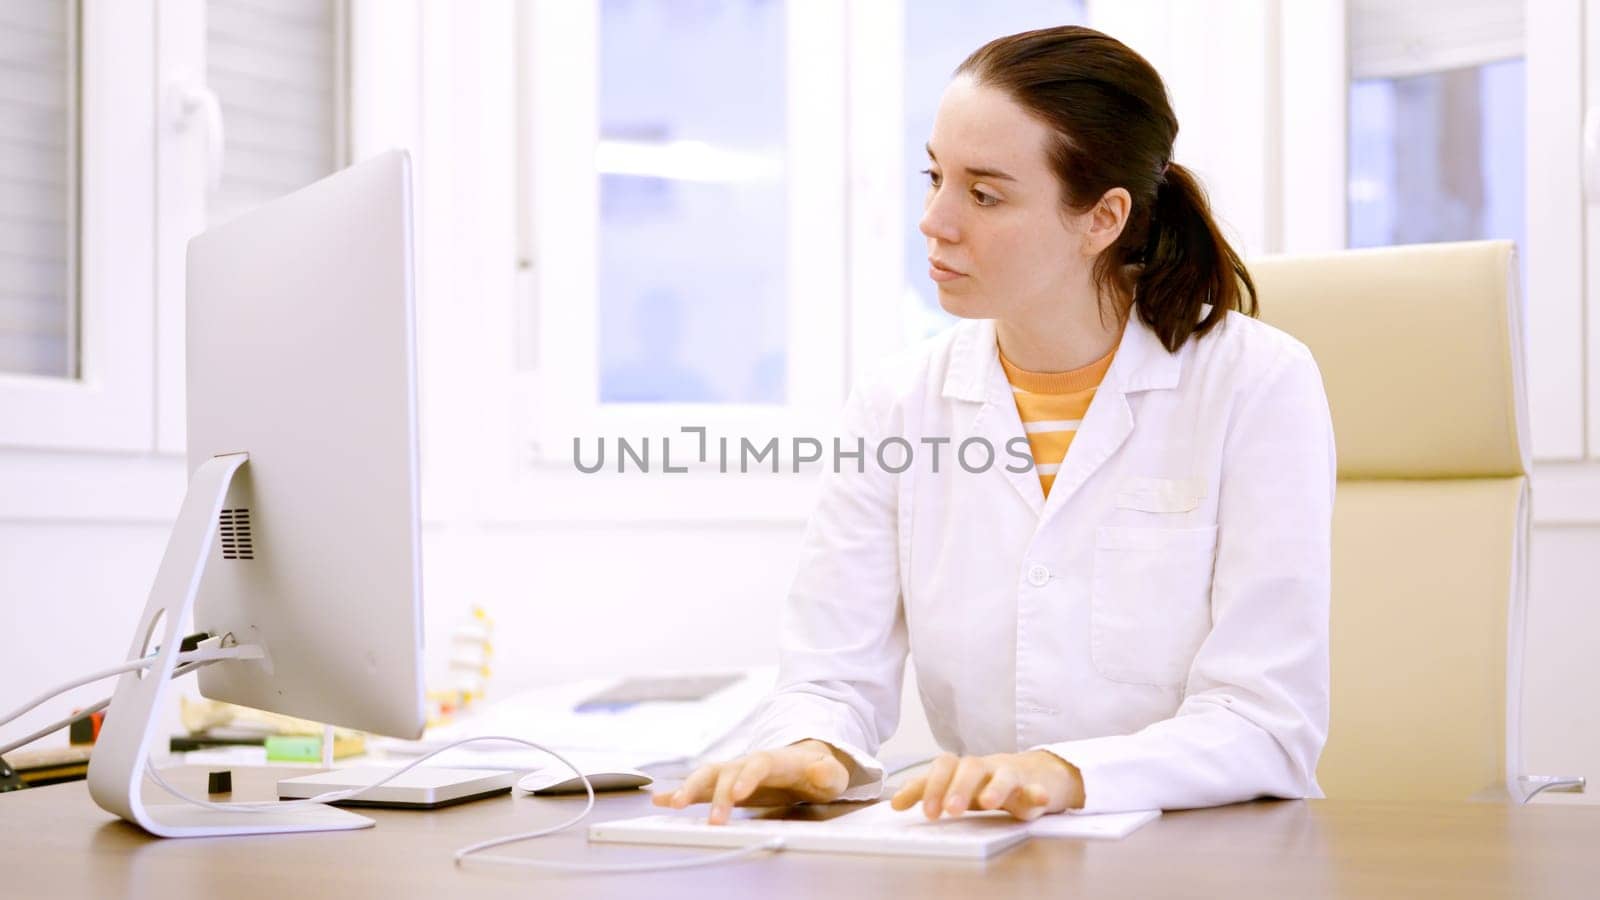 Female doctor typing using computer in a clinic room